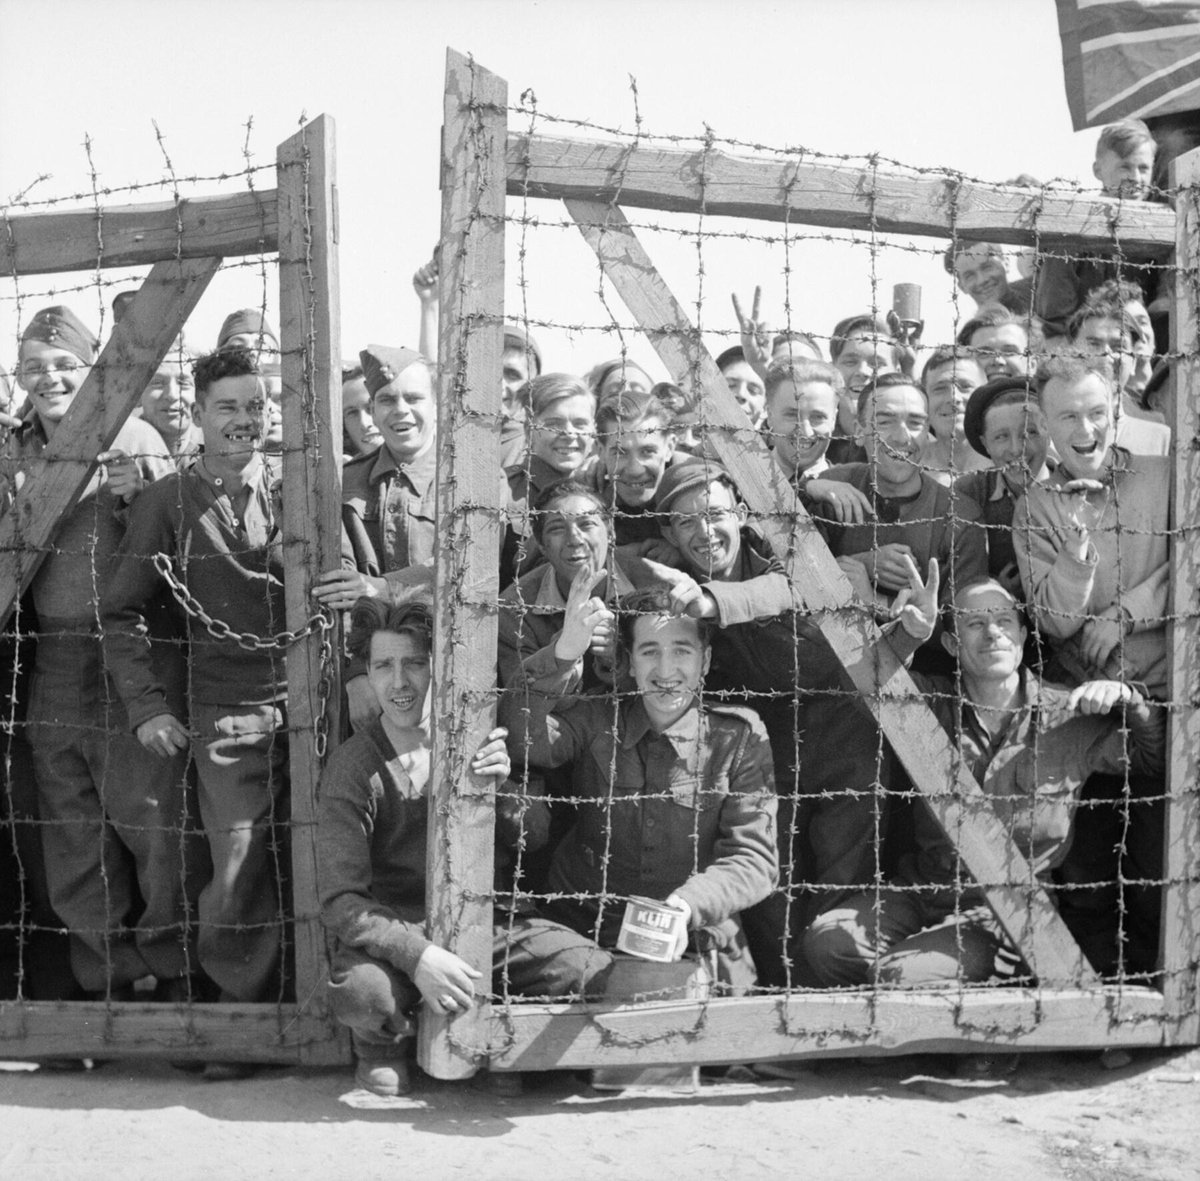 10 of 16: Roddie’s courage saved the lives of more than 200 Jewish Soldiers in that POW camp.Three months later, Roddie and all Americans imprisoned in Stalag IX-A were freed by Allied forces.